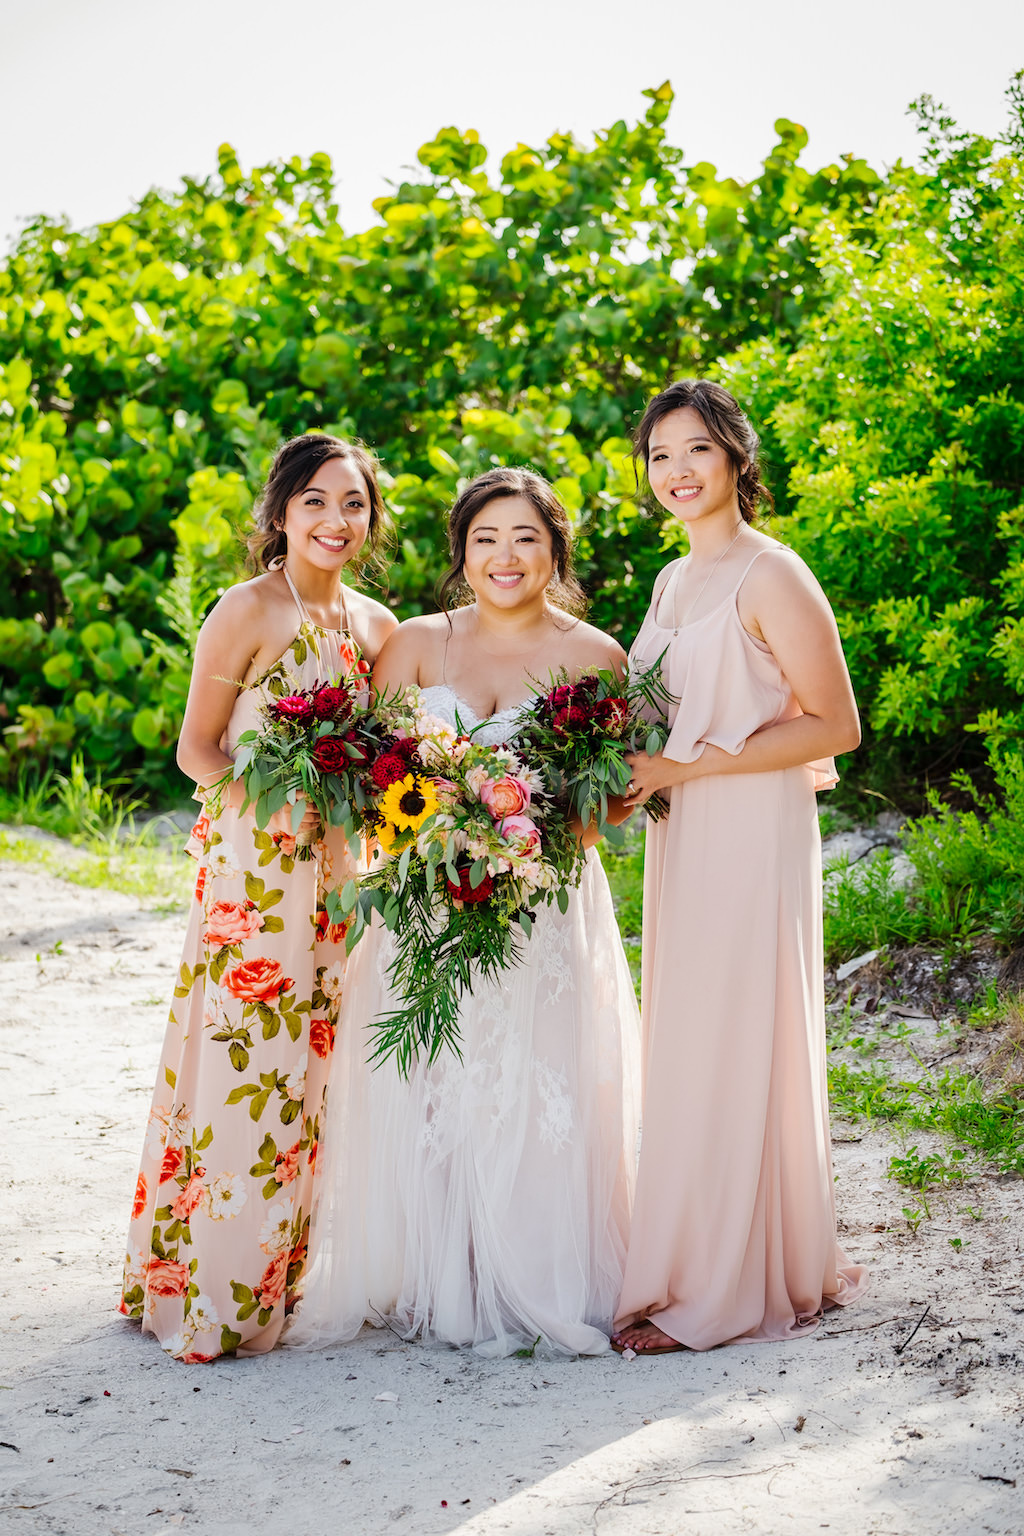 St. Pete Bride Holding Tropical Organic Yellow Sunflowers, Pink and Red Roses with Greenery Floral Bouquet, Bridesmaids in Mix and Match Blush Pink and Floral Print Floor Length Dresses Beachfront Wedding Portrait